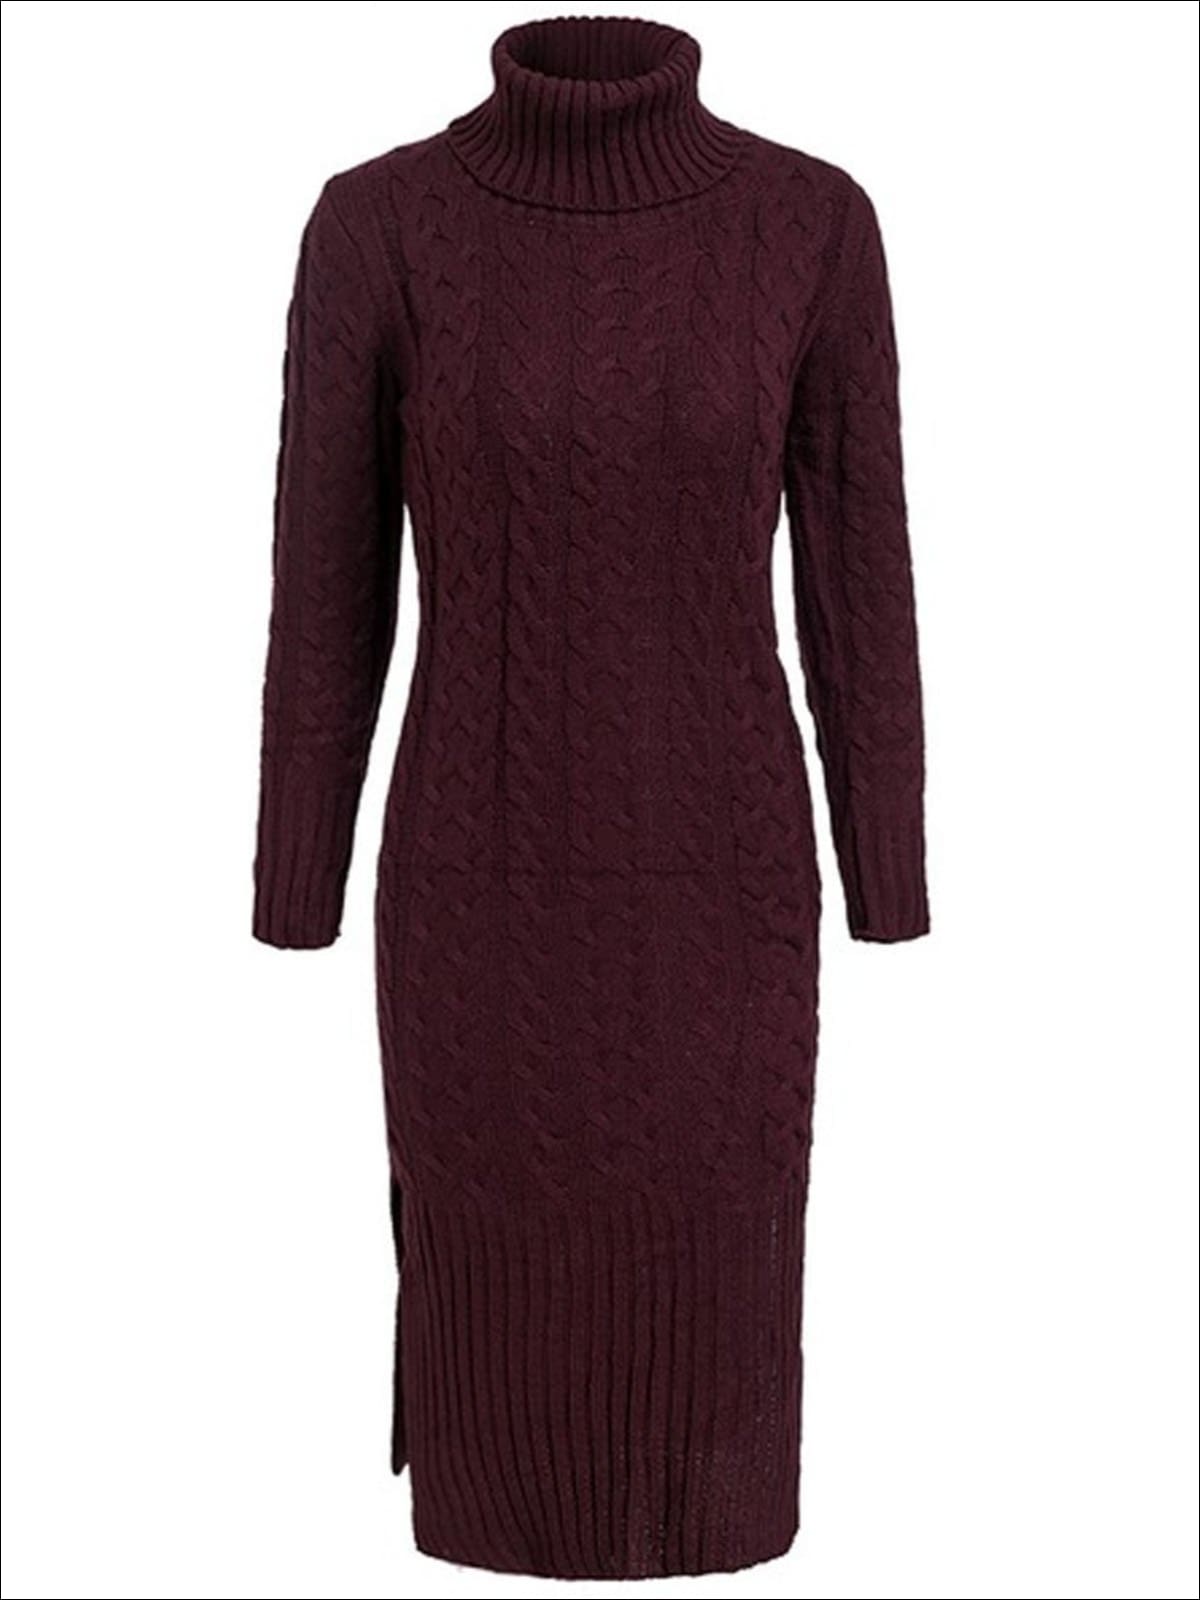 Womens Fall Cable Knit Turtleneck Sweater Dress - Burgundy / One Size - Womens Fall Dresses